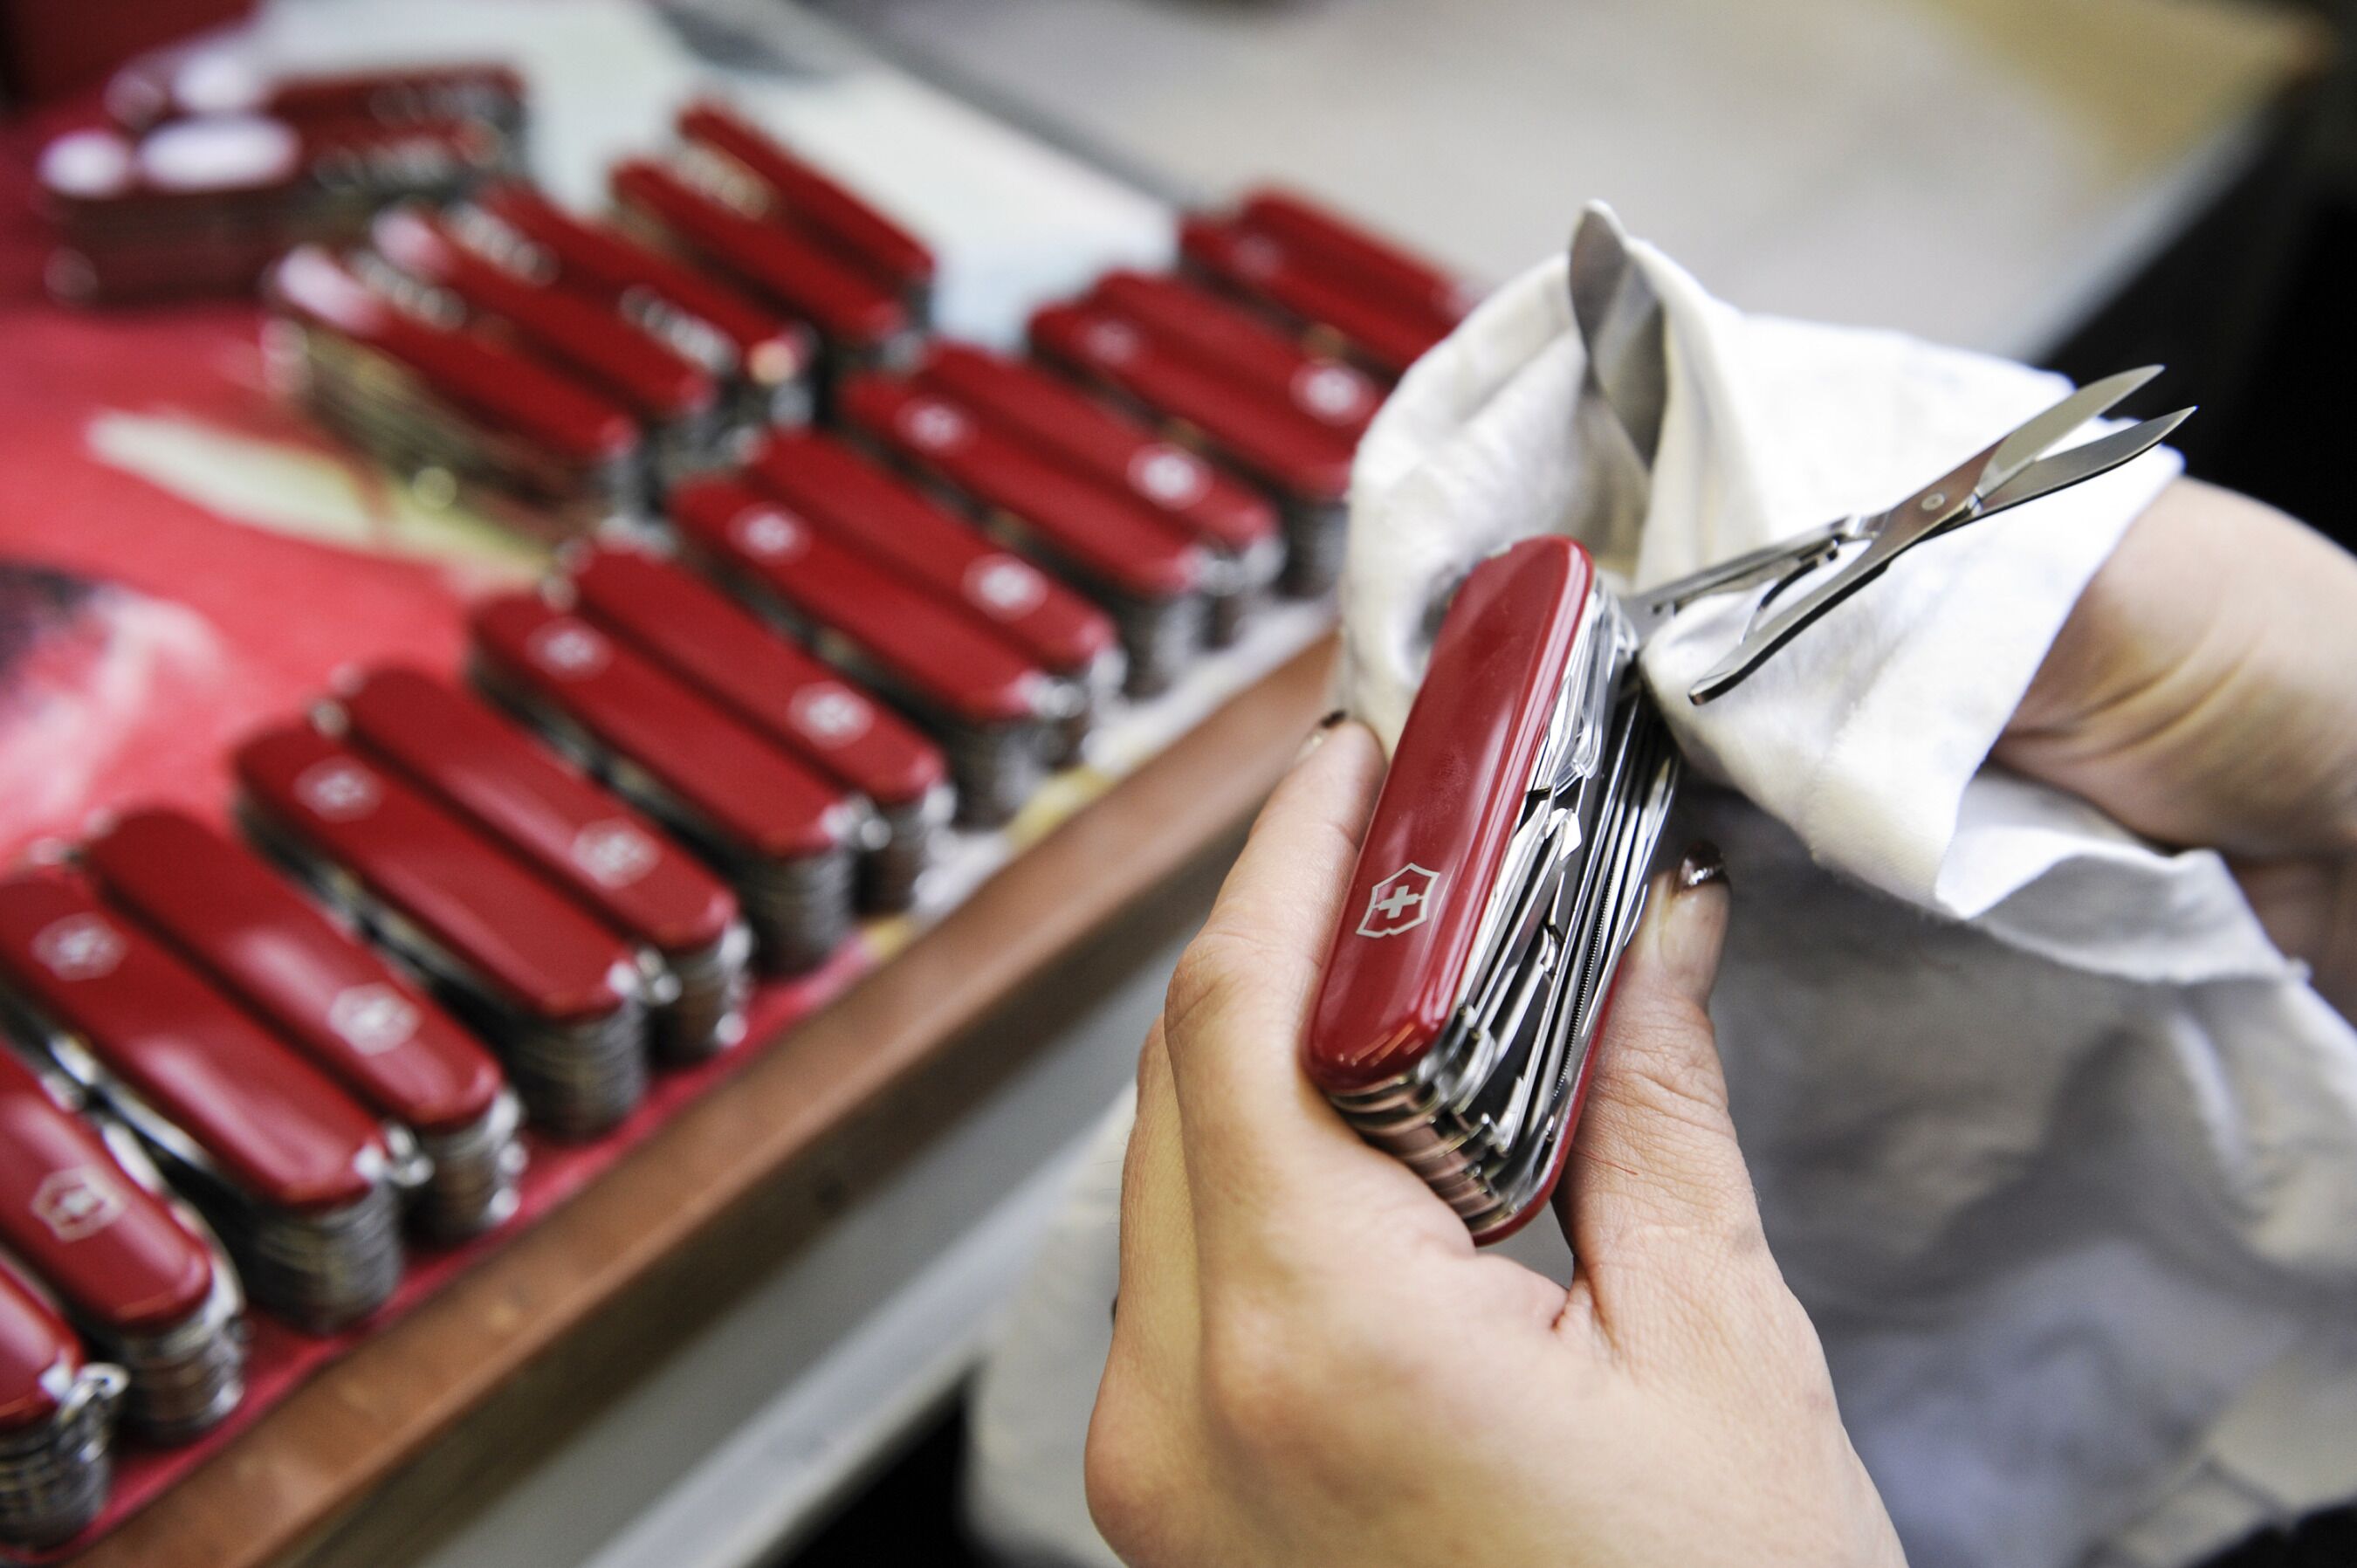 swiss army knife now available without the knife